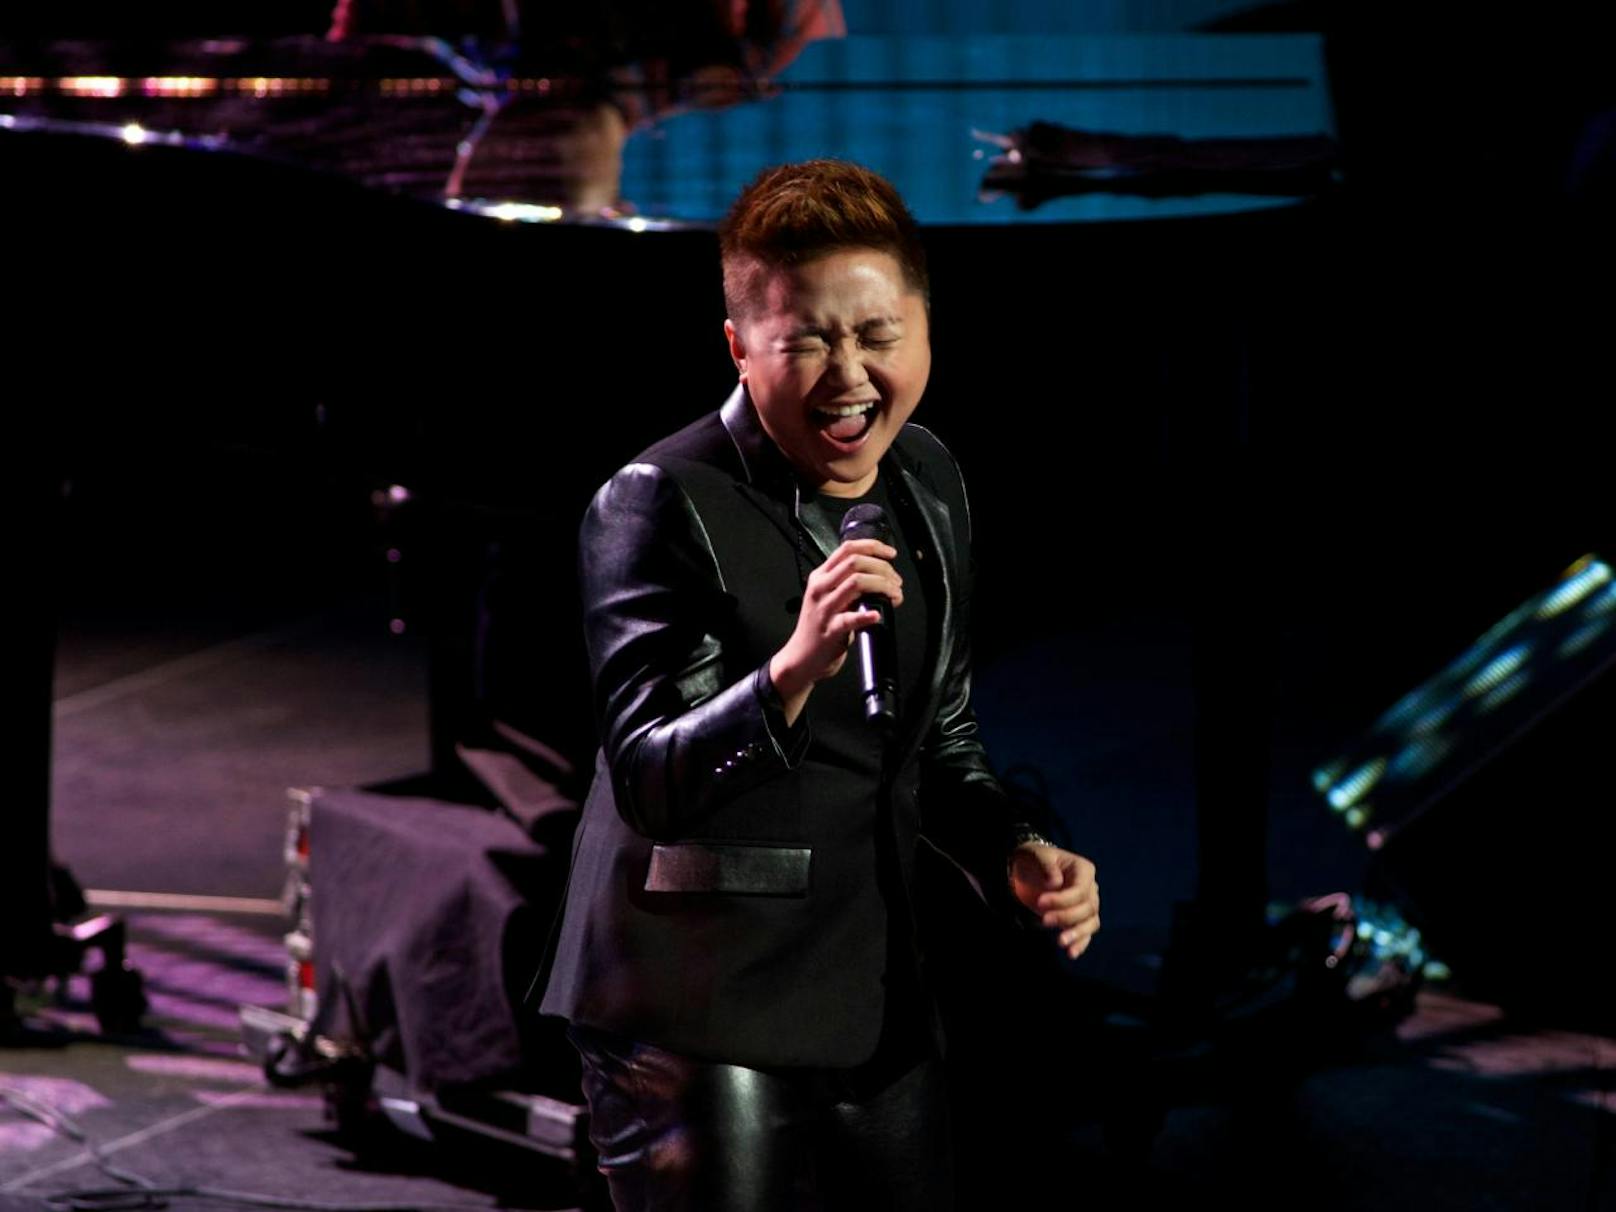  Charice Pempengco